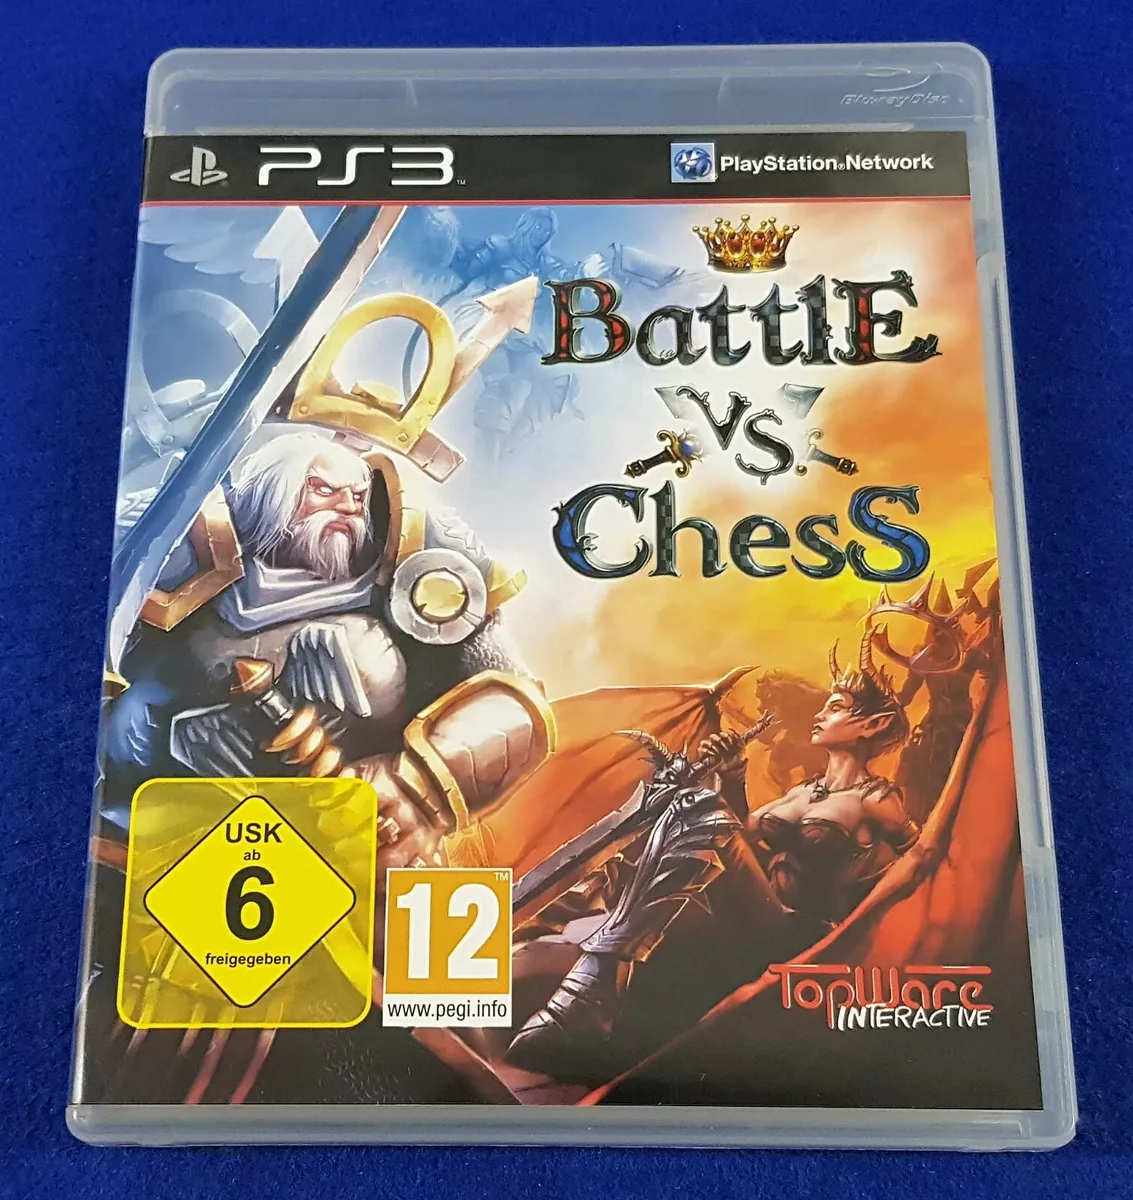 ps3 BATTLE vs CHESS Game REGION FREE (Works On US Consoles) PAL UK EXCLUSIVE